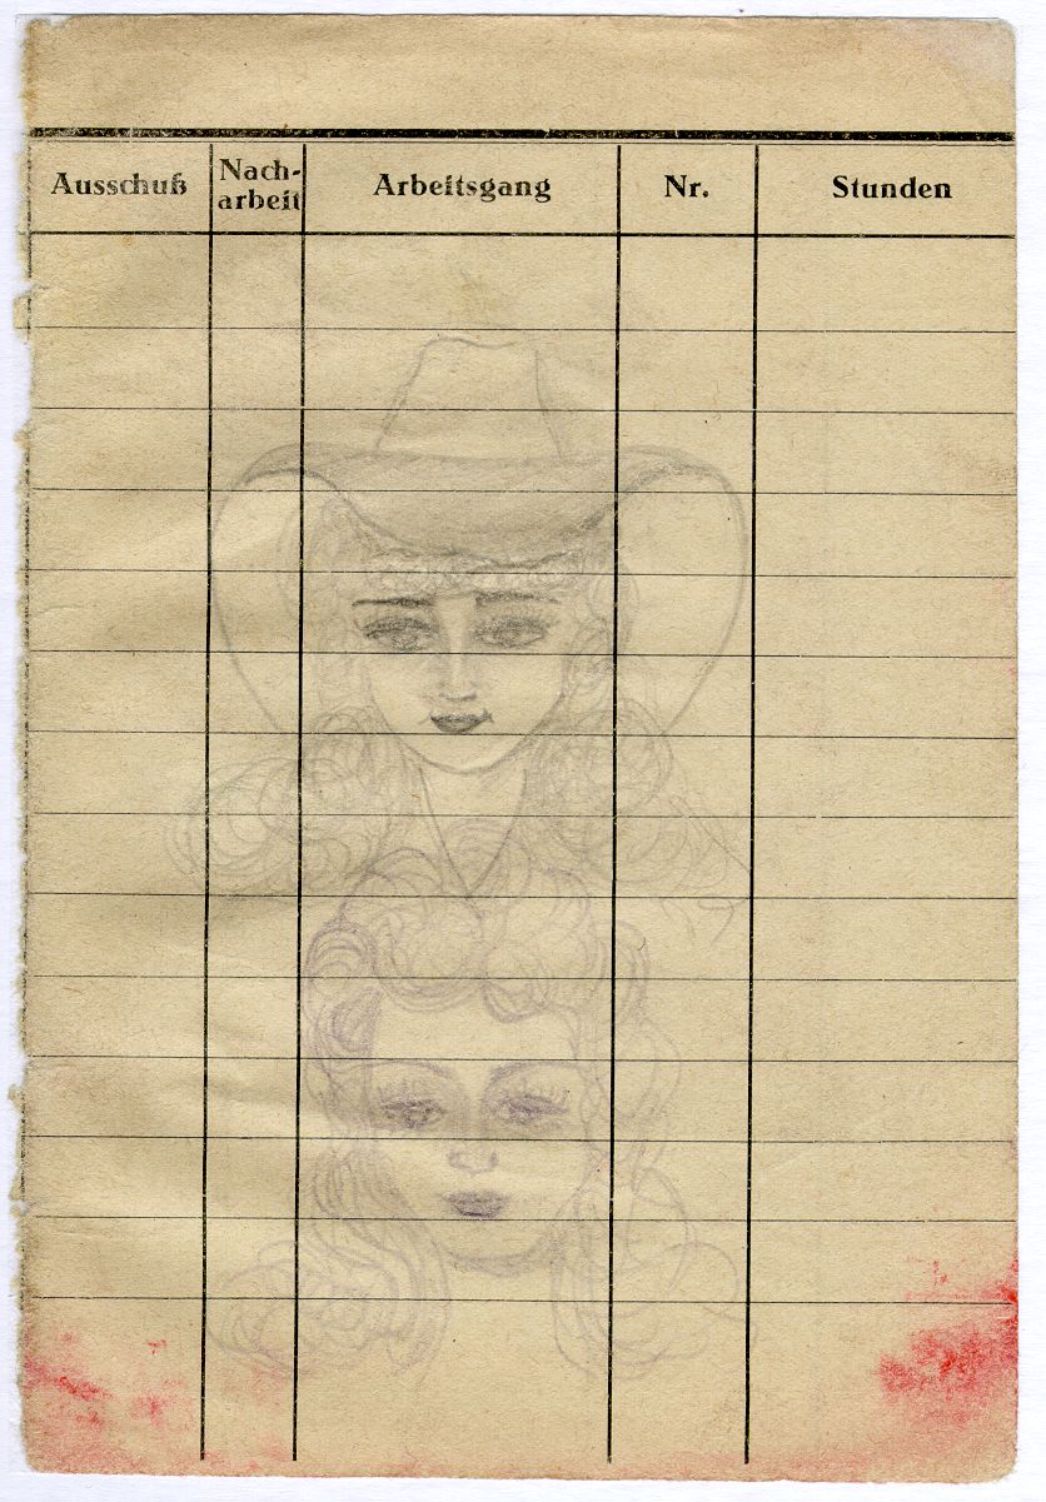 The drawings shows two girls faces, The made up and curled women wear magnificent hats. The drawing was made on a work capture sheet.